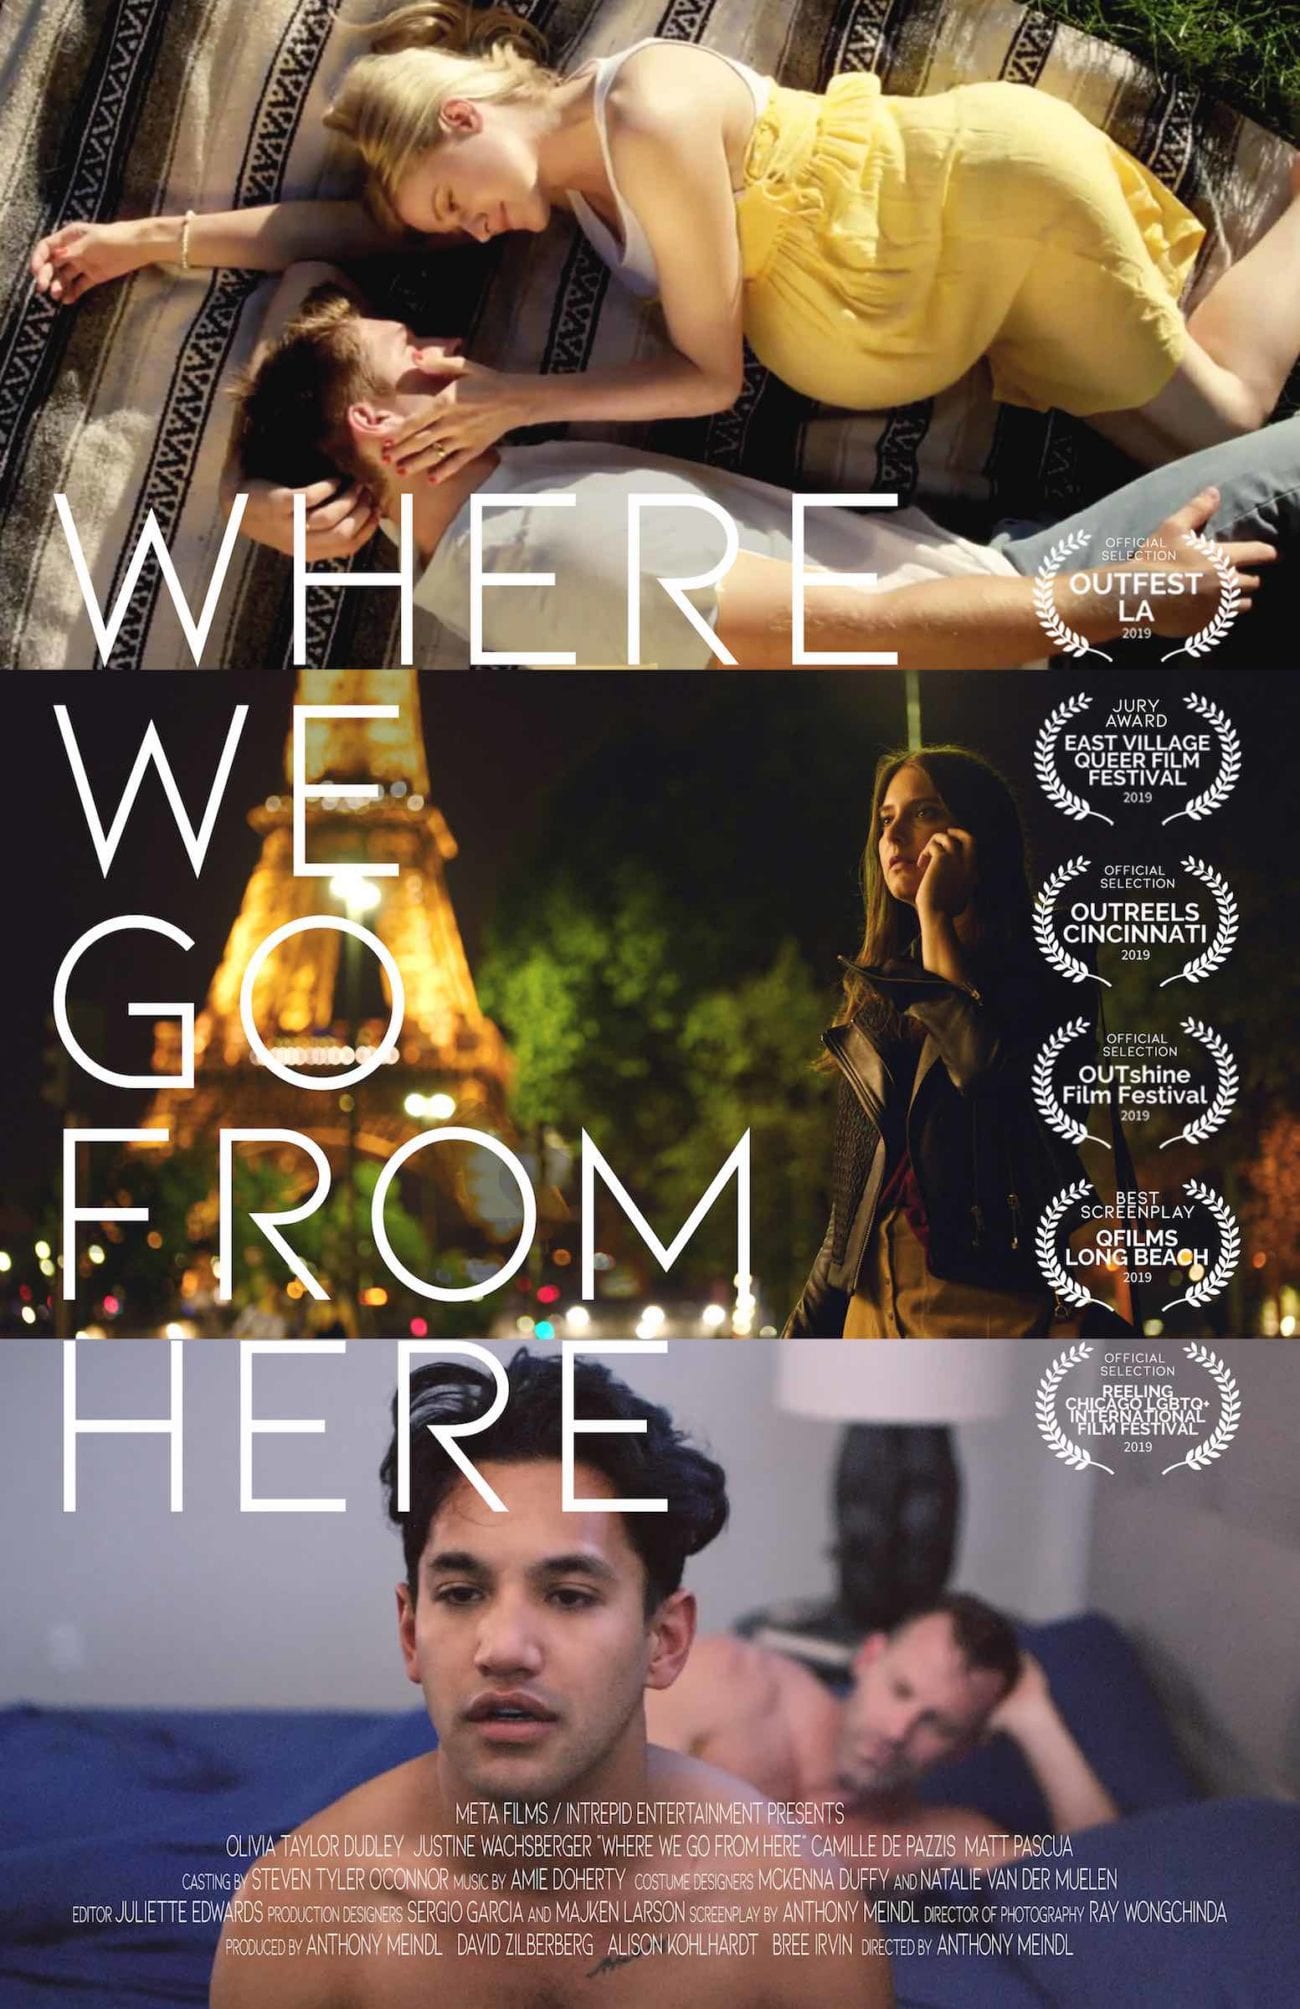 Here’s everything you need to know before the February 1st Hulu premiere of Anthony Meindl's drama, 'Where We Go From Here'.